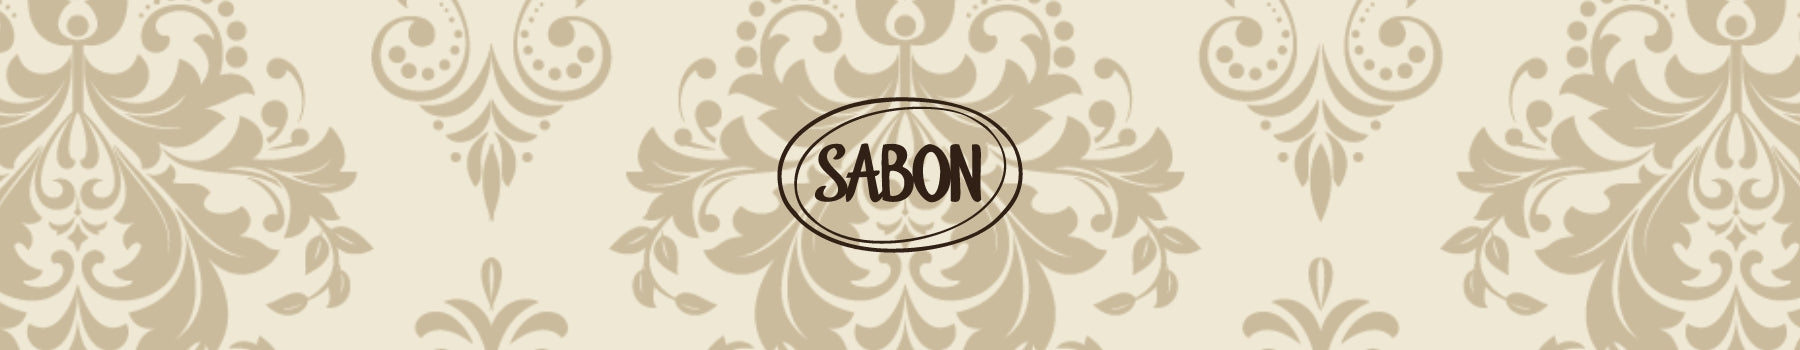 Sabon Best Sellers Collection